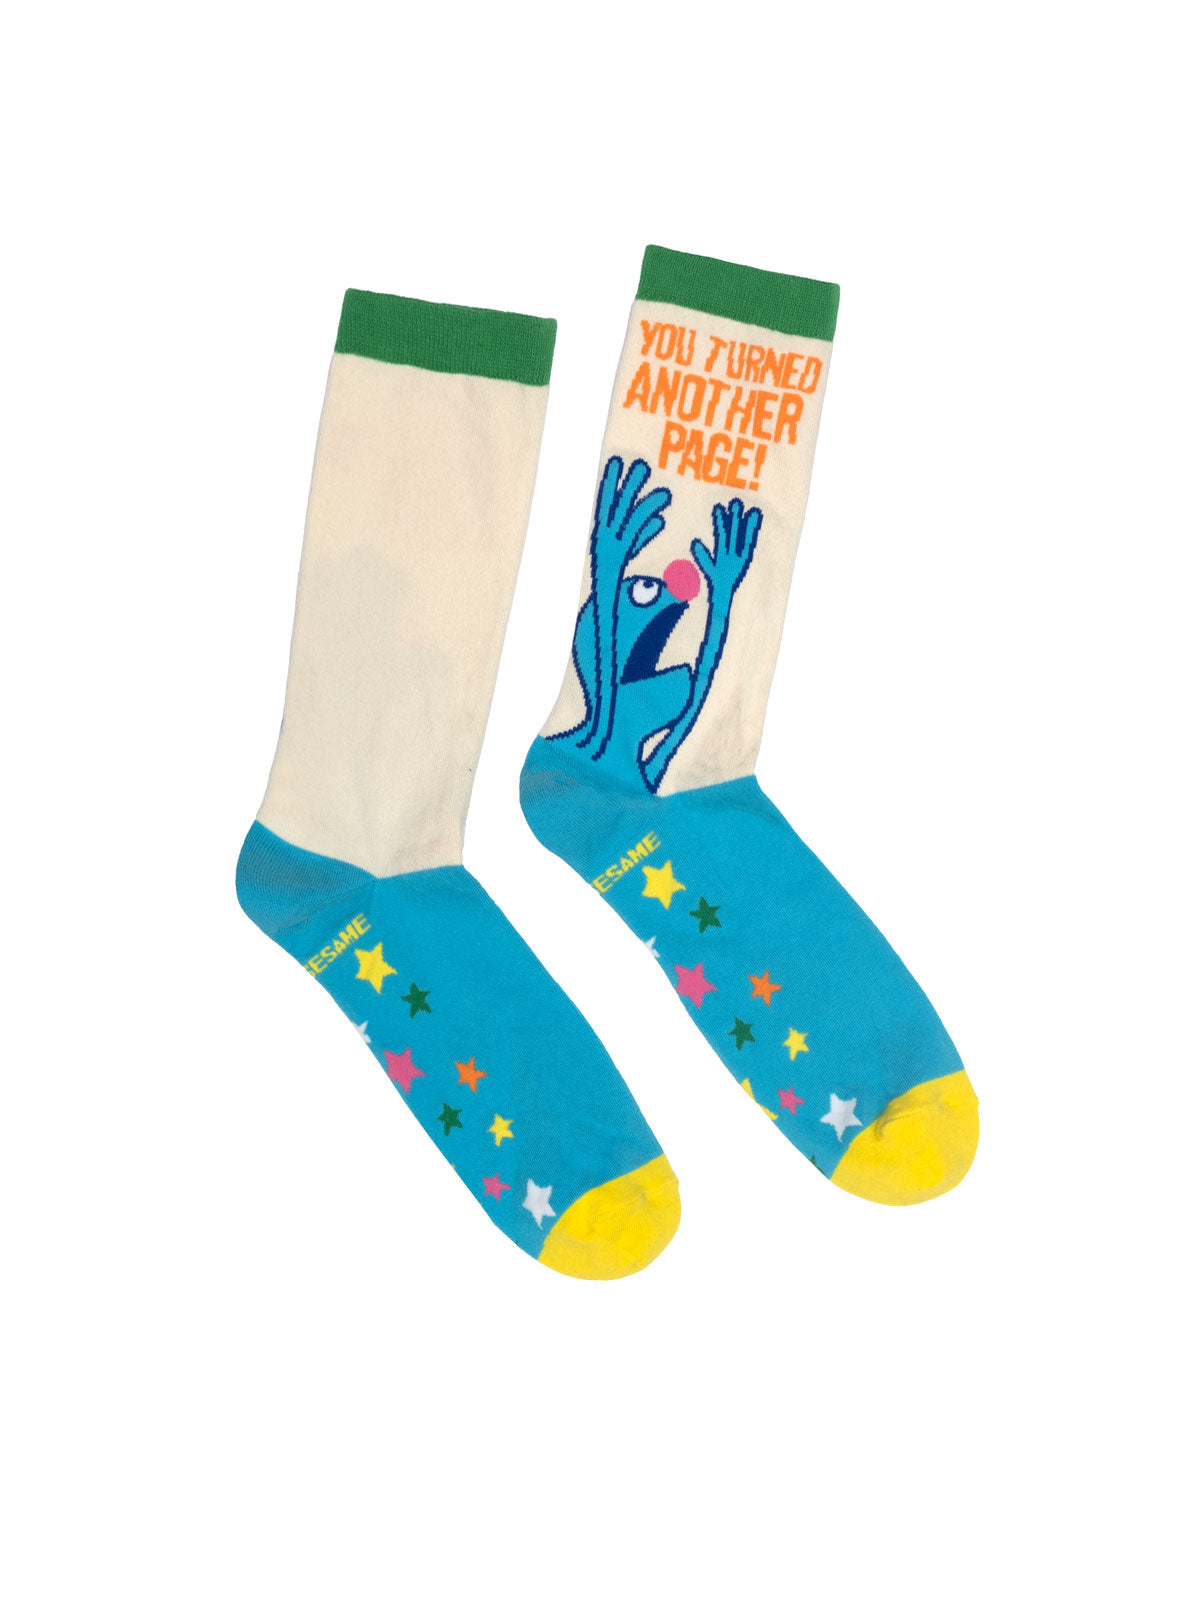 Creature Printed Multi-coloured Cotton Socks for Kids - (Pack of 4)